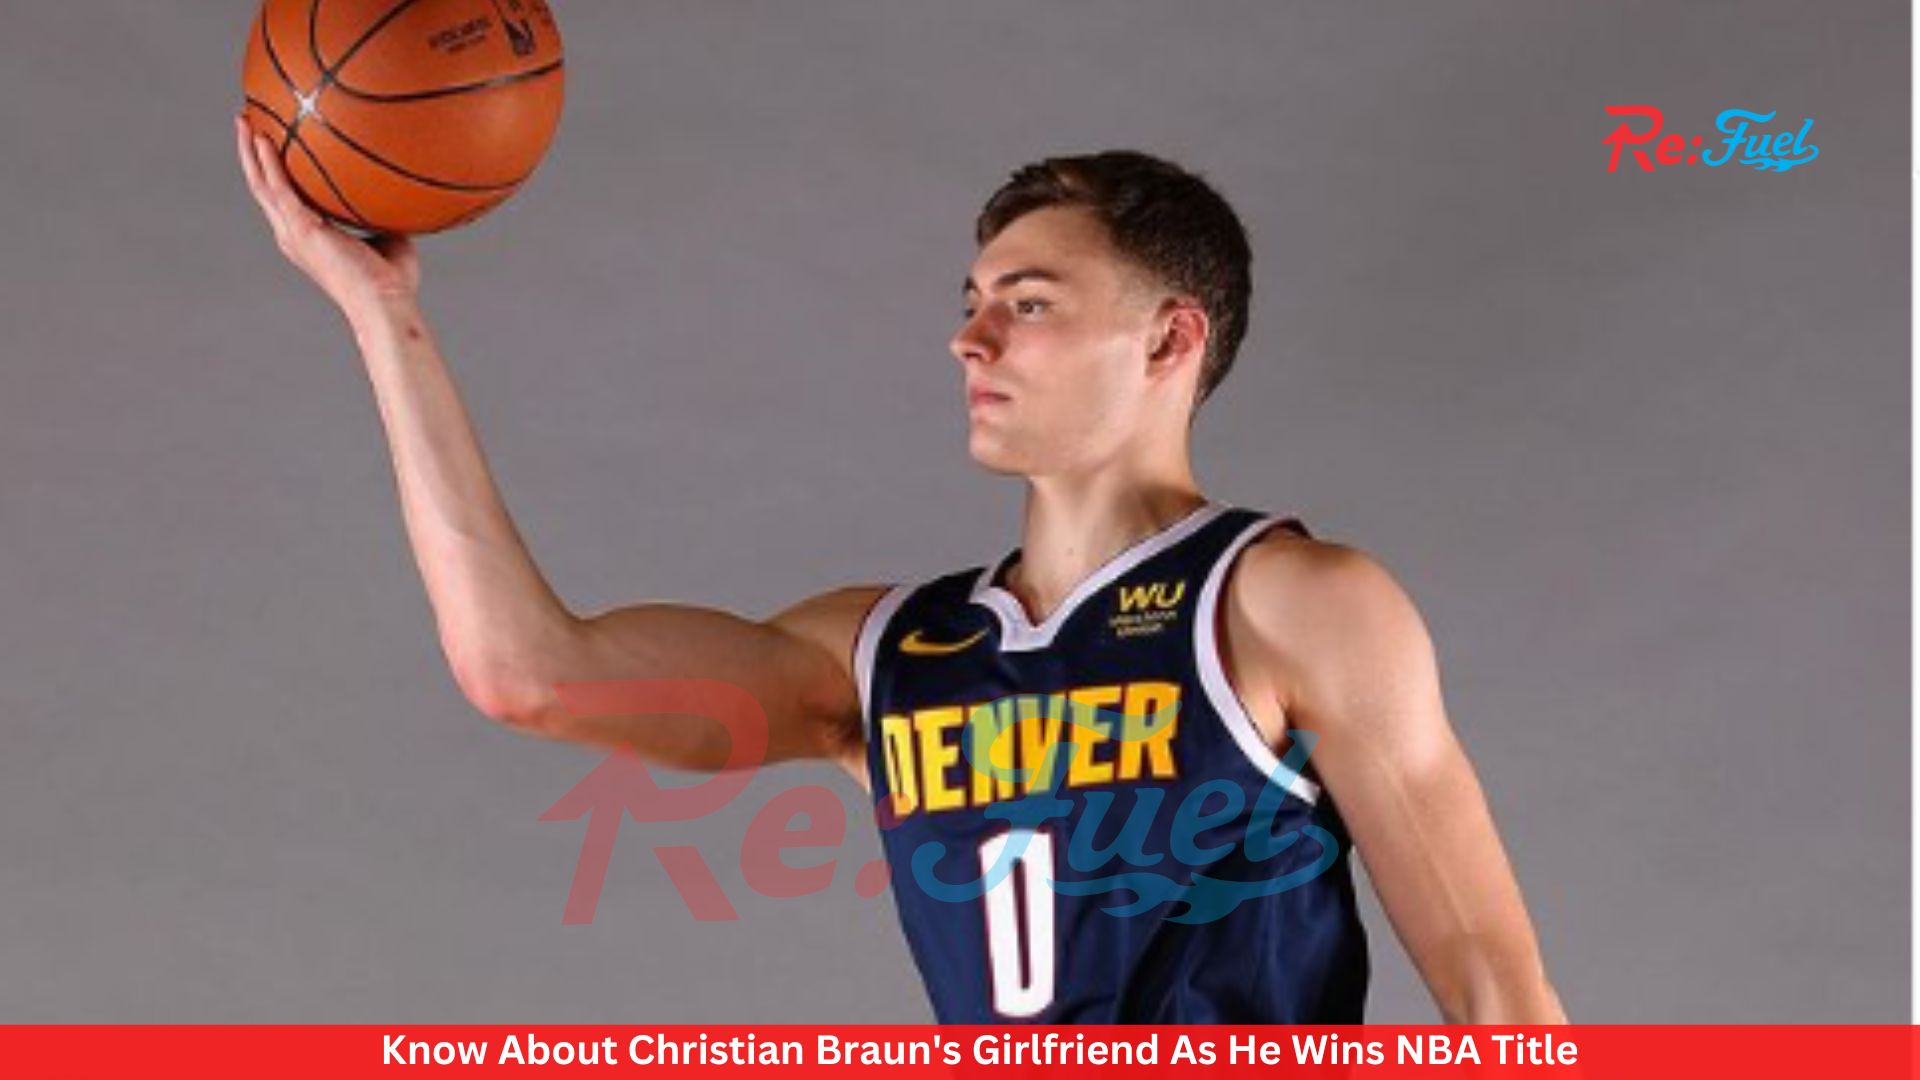 Know About Christian Braun's Girlfriend As He Wins NBA Title